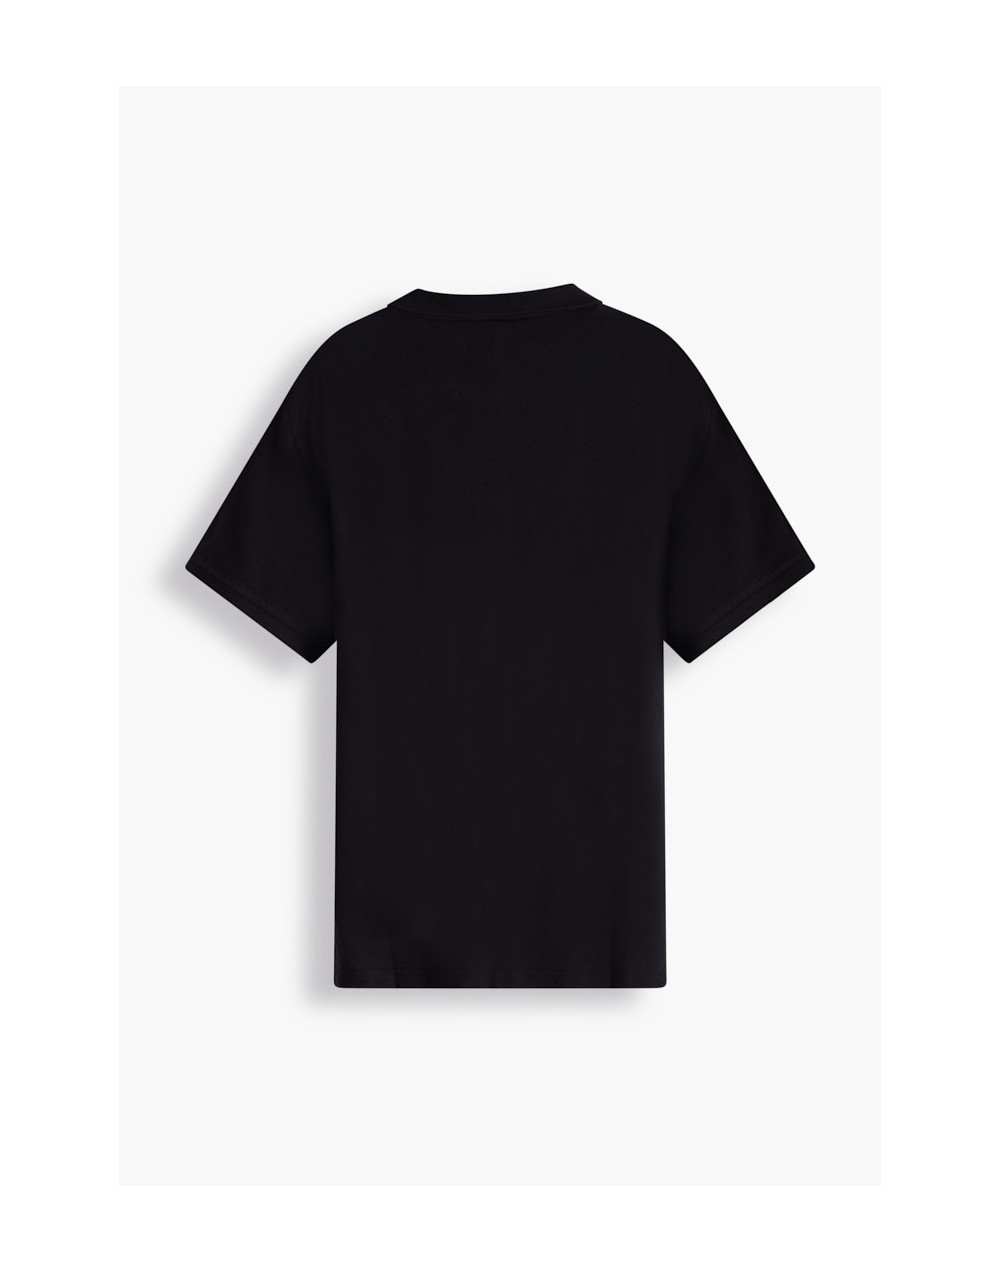 T-Shirt Levi's® New Levis Hm Polo Mineral Blac 35883-0007